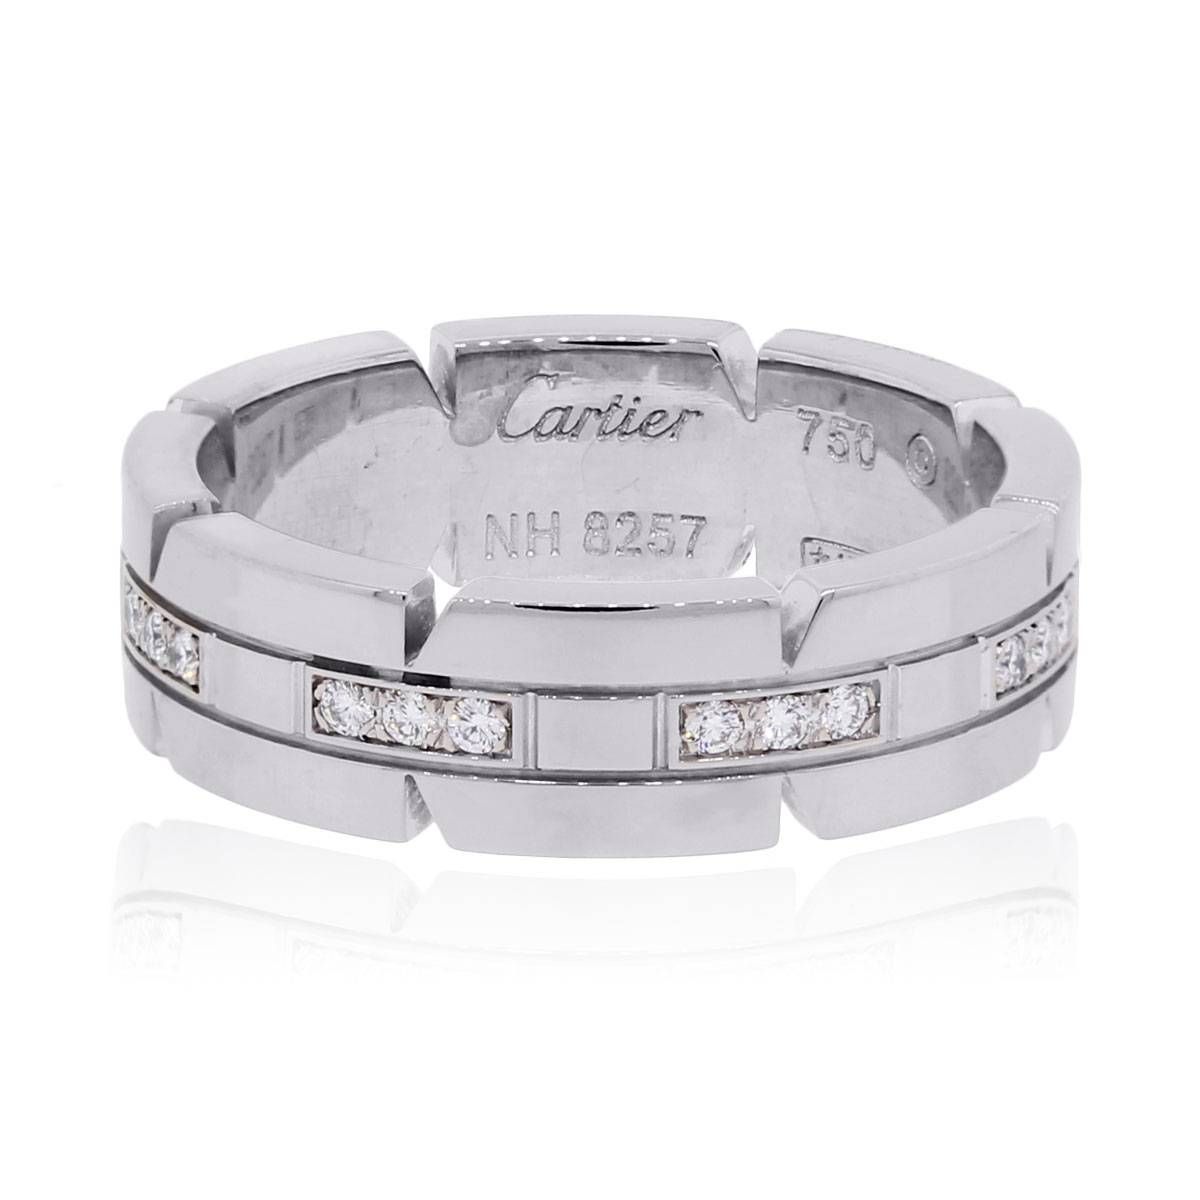 Cartier 18k Tank Francaise Diamond Wedding Band White Gold In Cartier Wedding Bands (View 5 of 15)